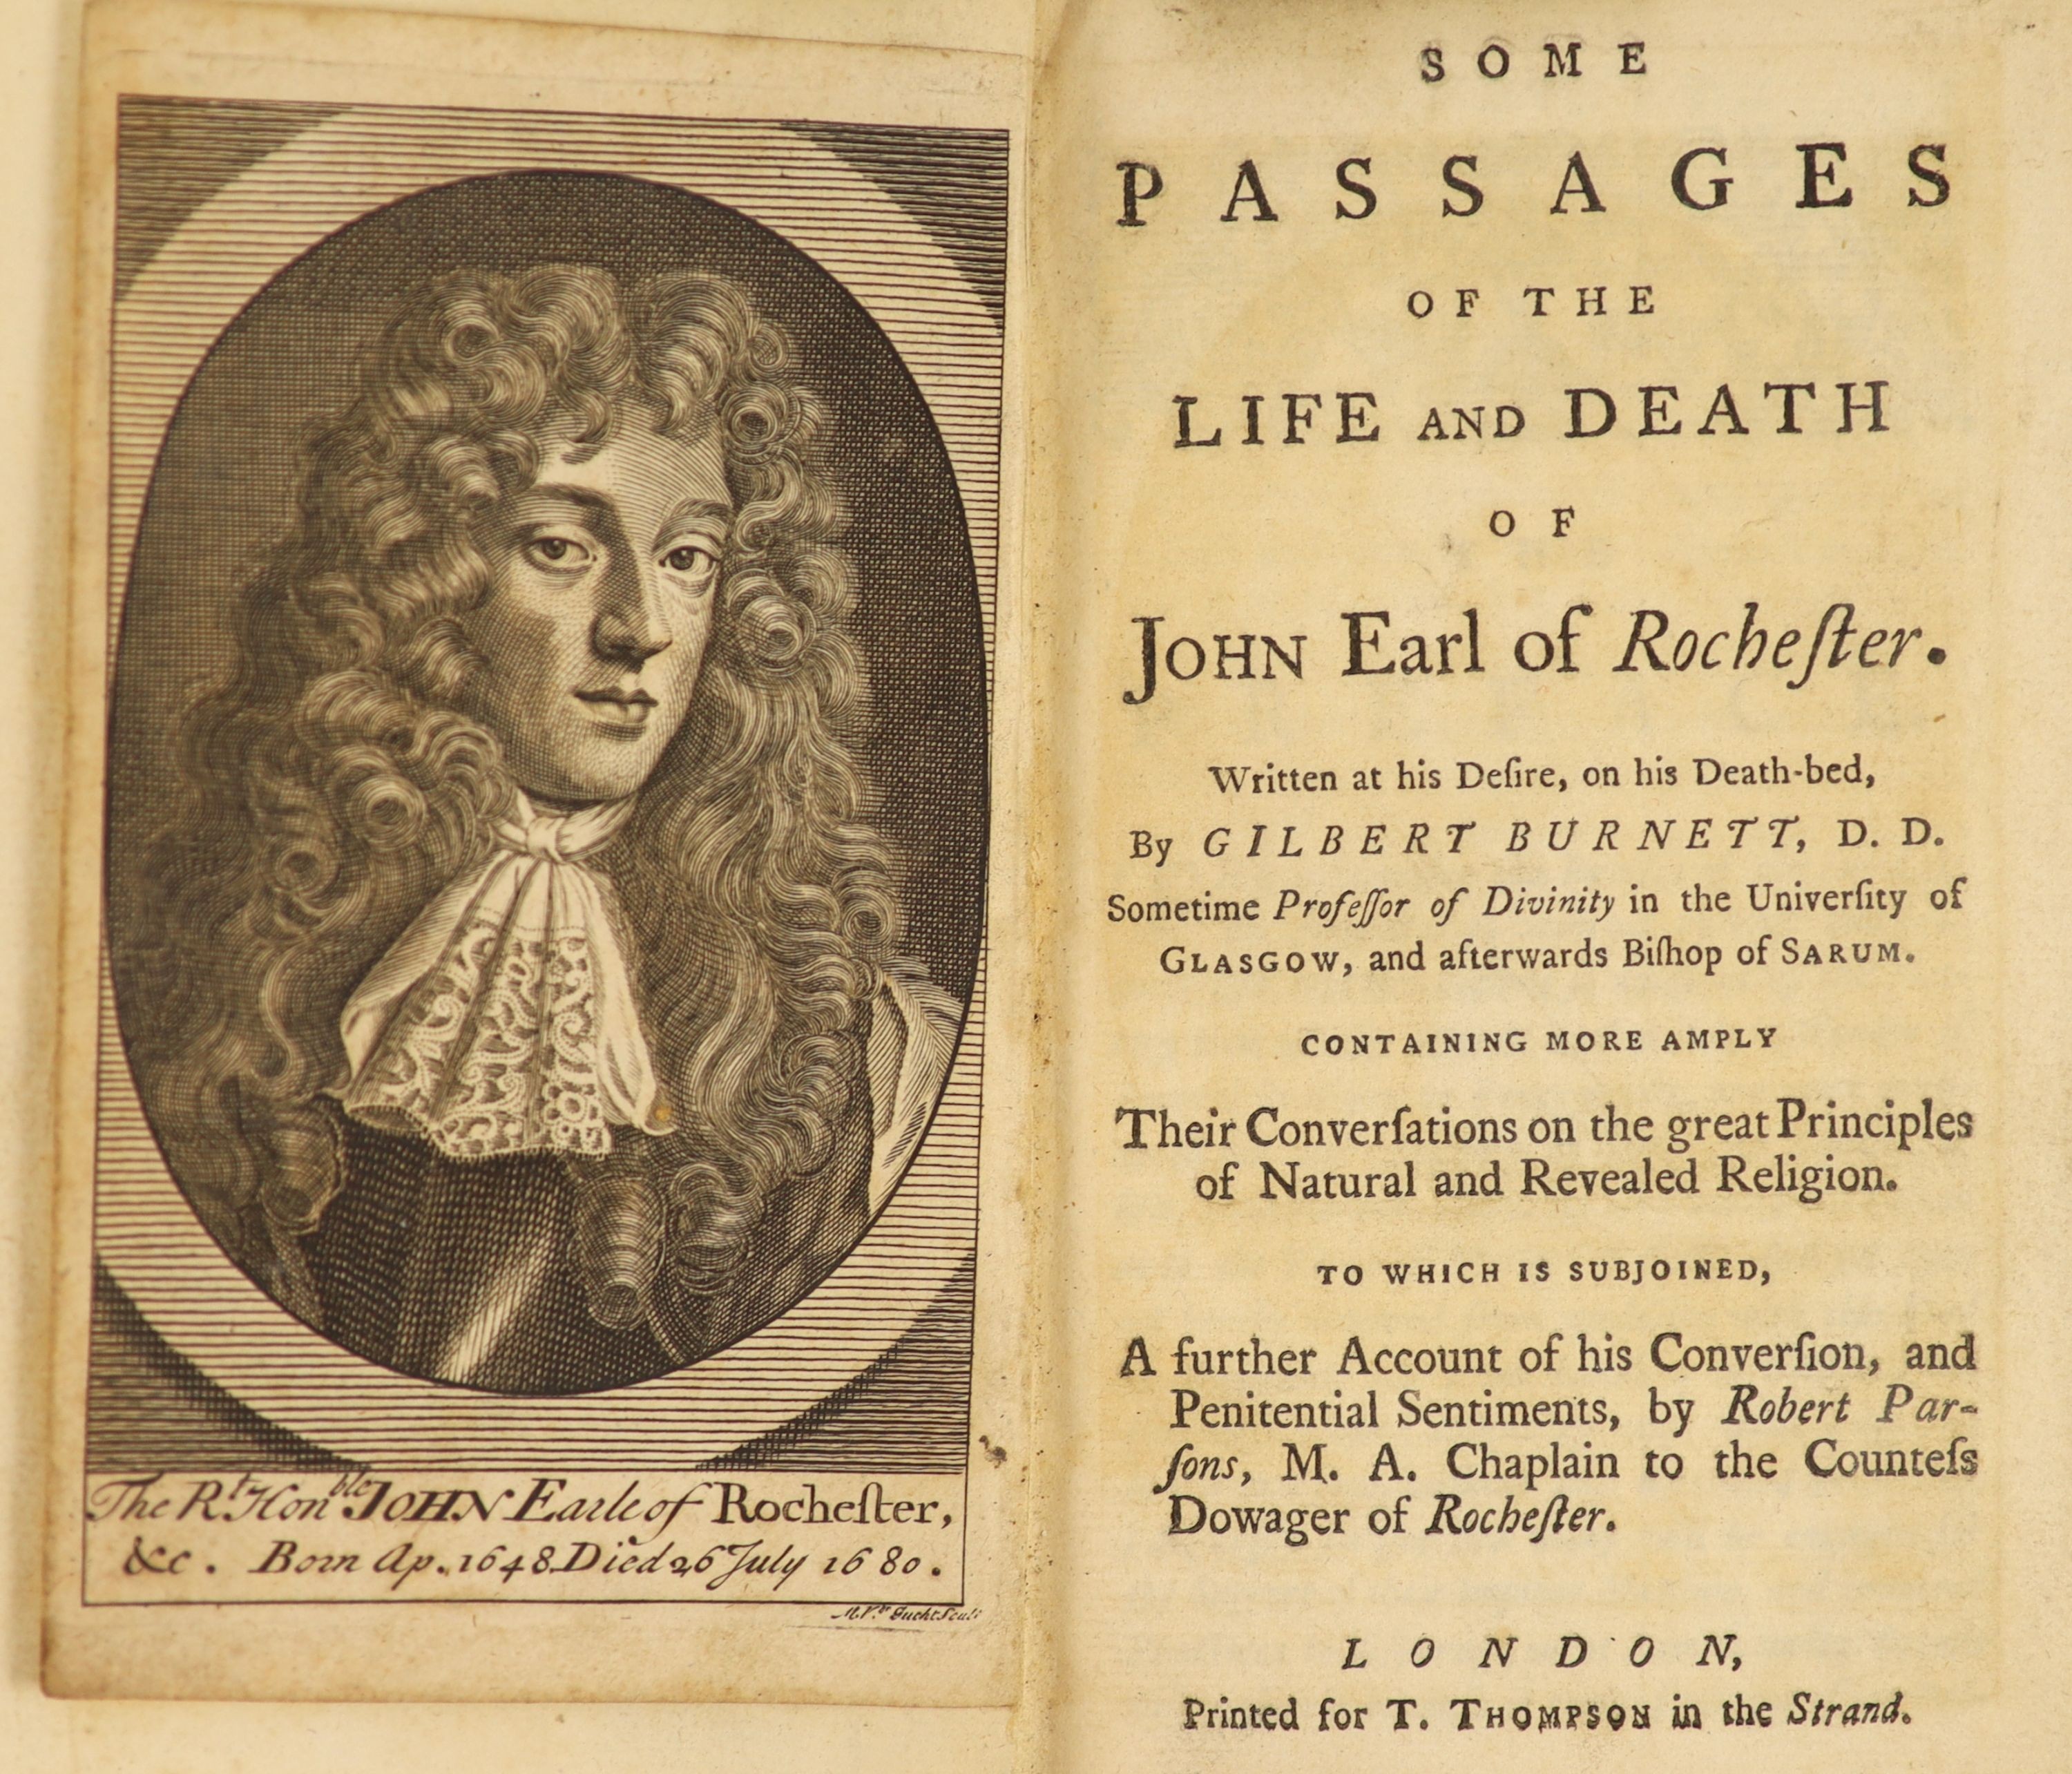 Burnett, Gilbert. Some Passages of the Life and Death of John Earl of Rochester. Written at his desire, on his death-bed...